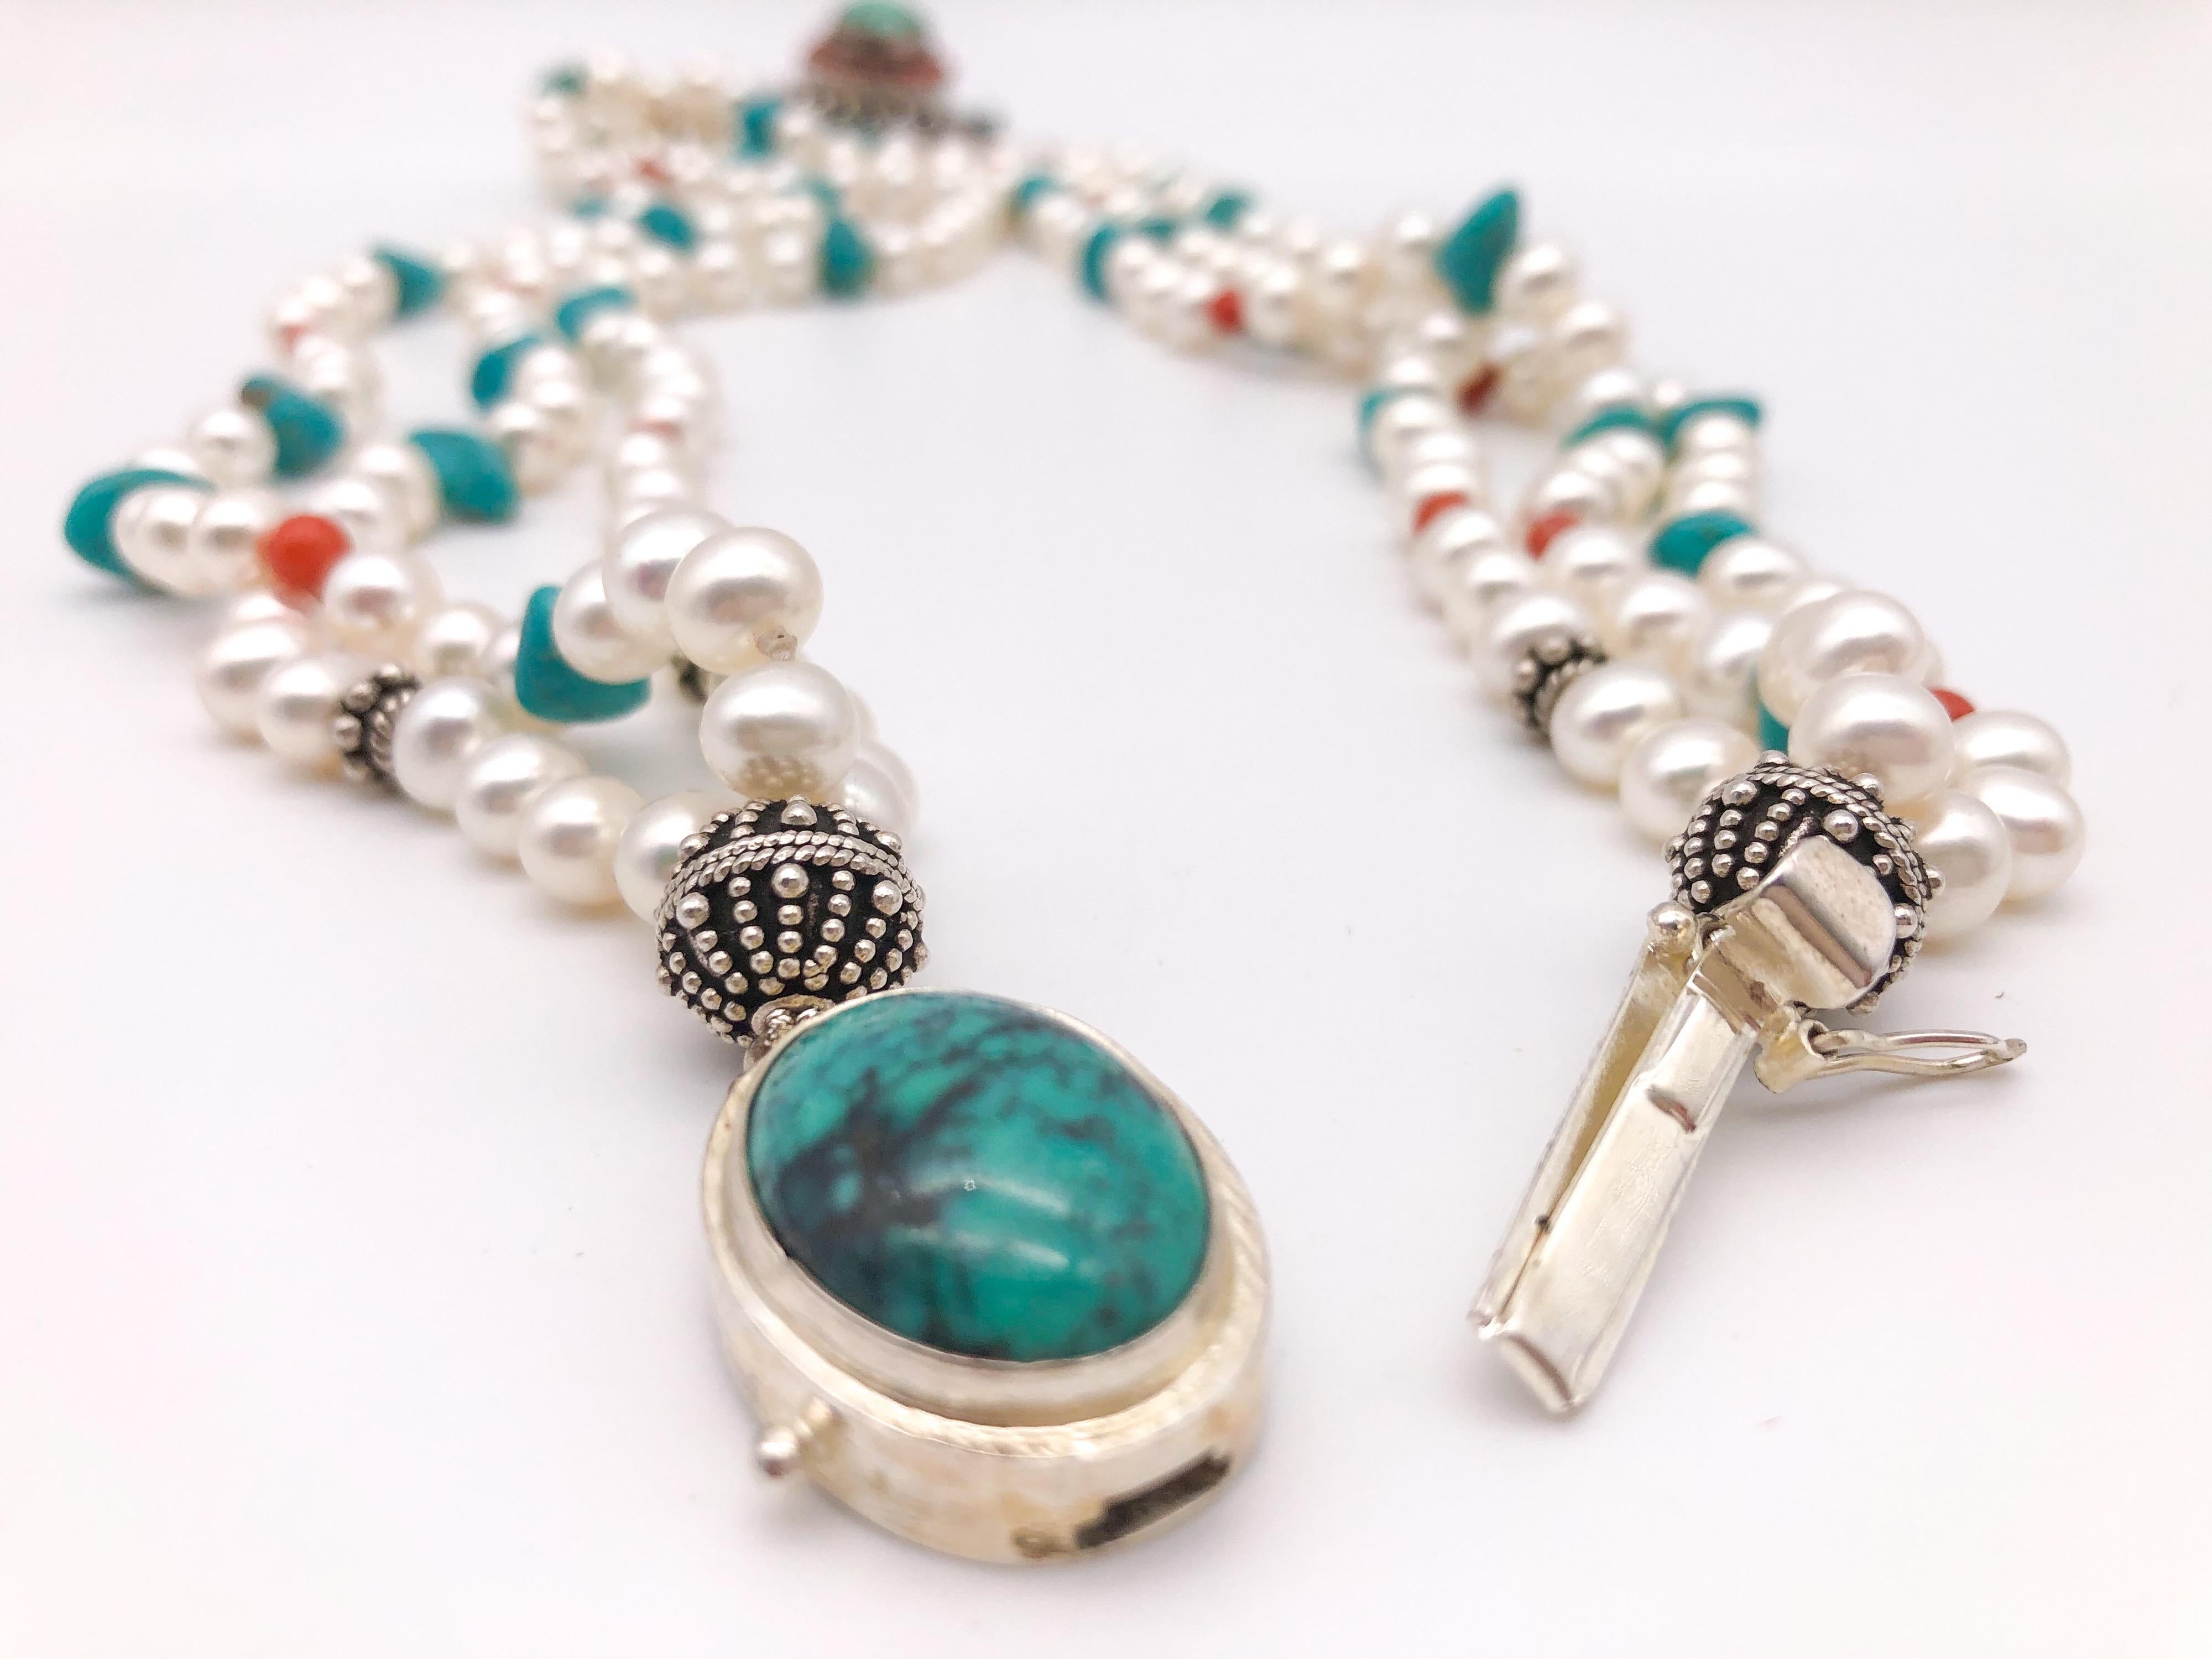 A.Jeschel Freshwater Pearls with Vintage Tibetan Turquoise pendant For Sale 4